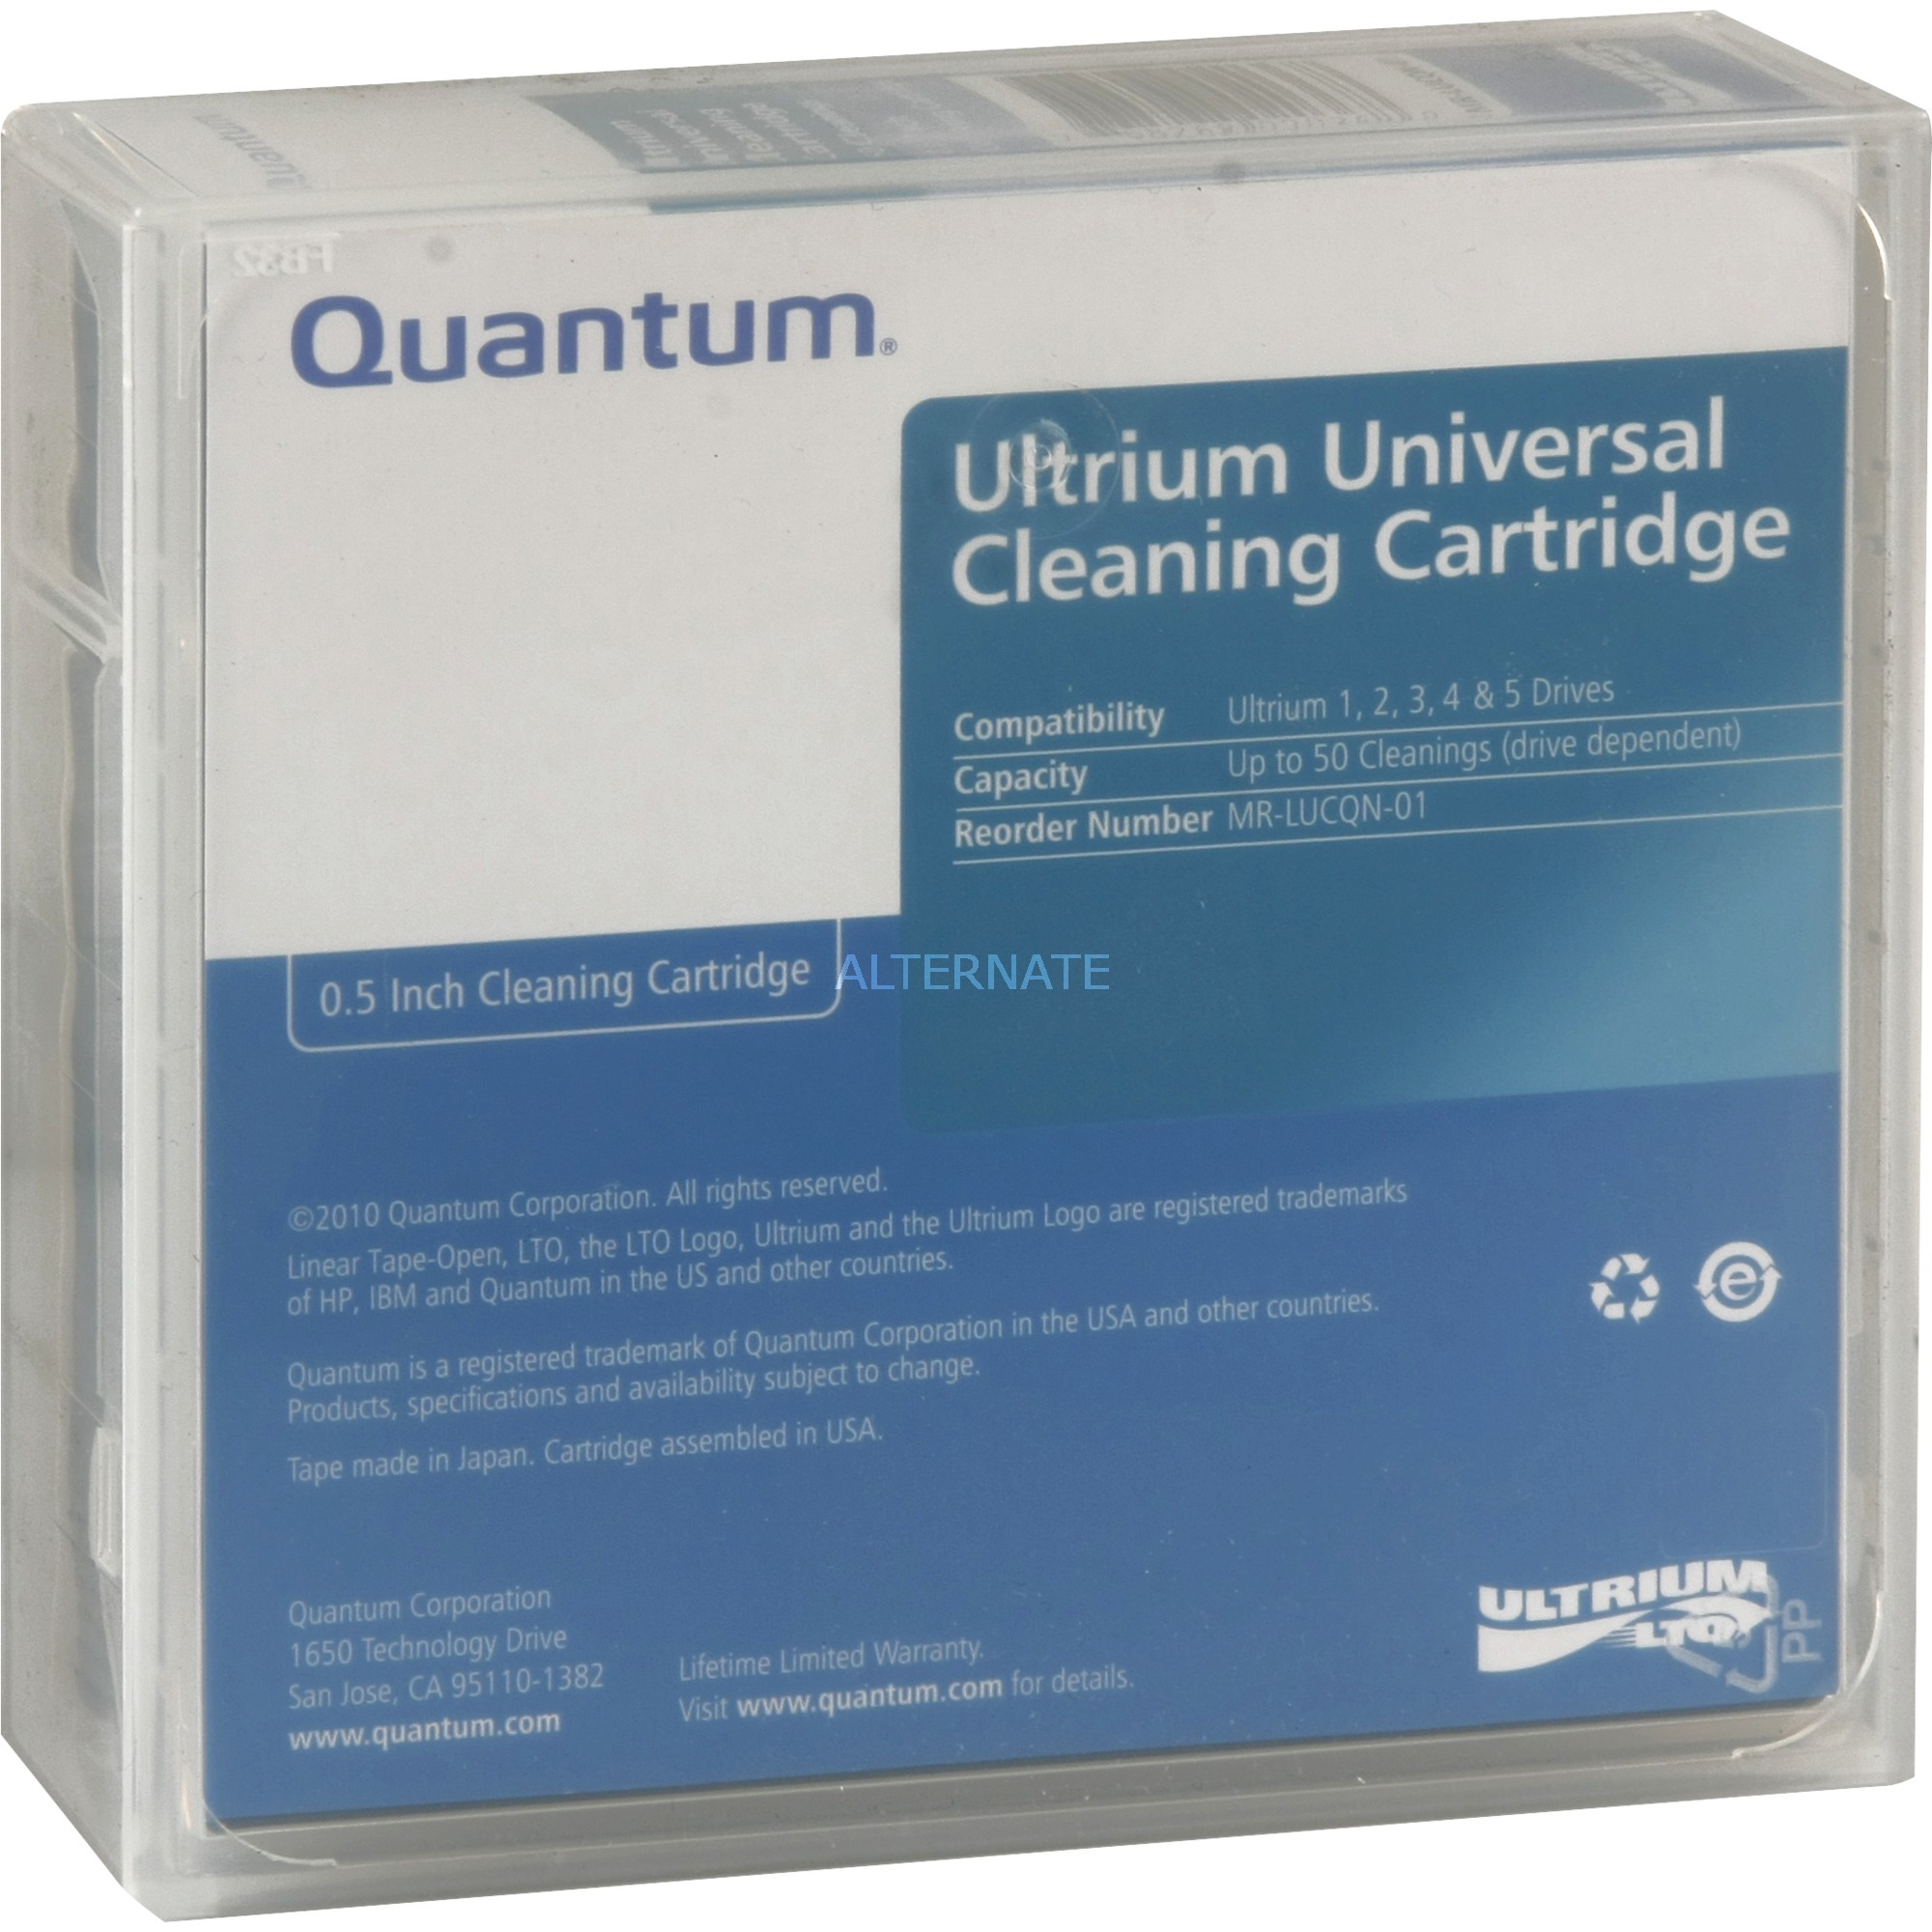 Cleaning cartridge, LTO Universal, Cleaning tape